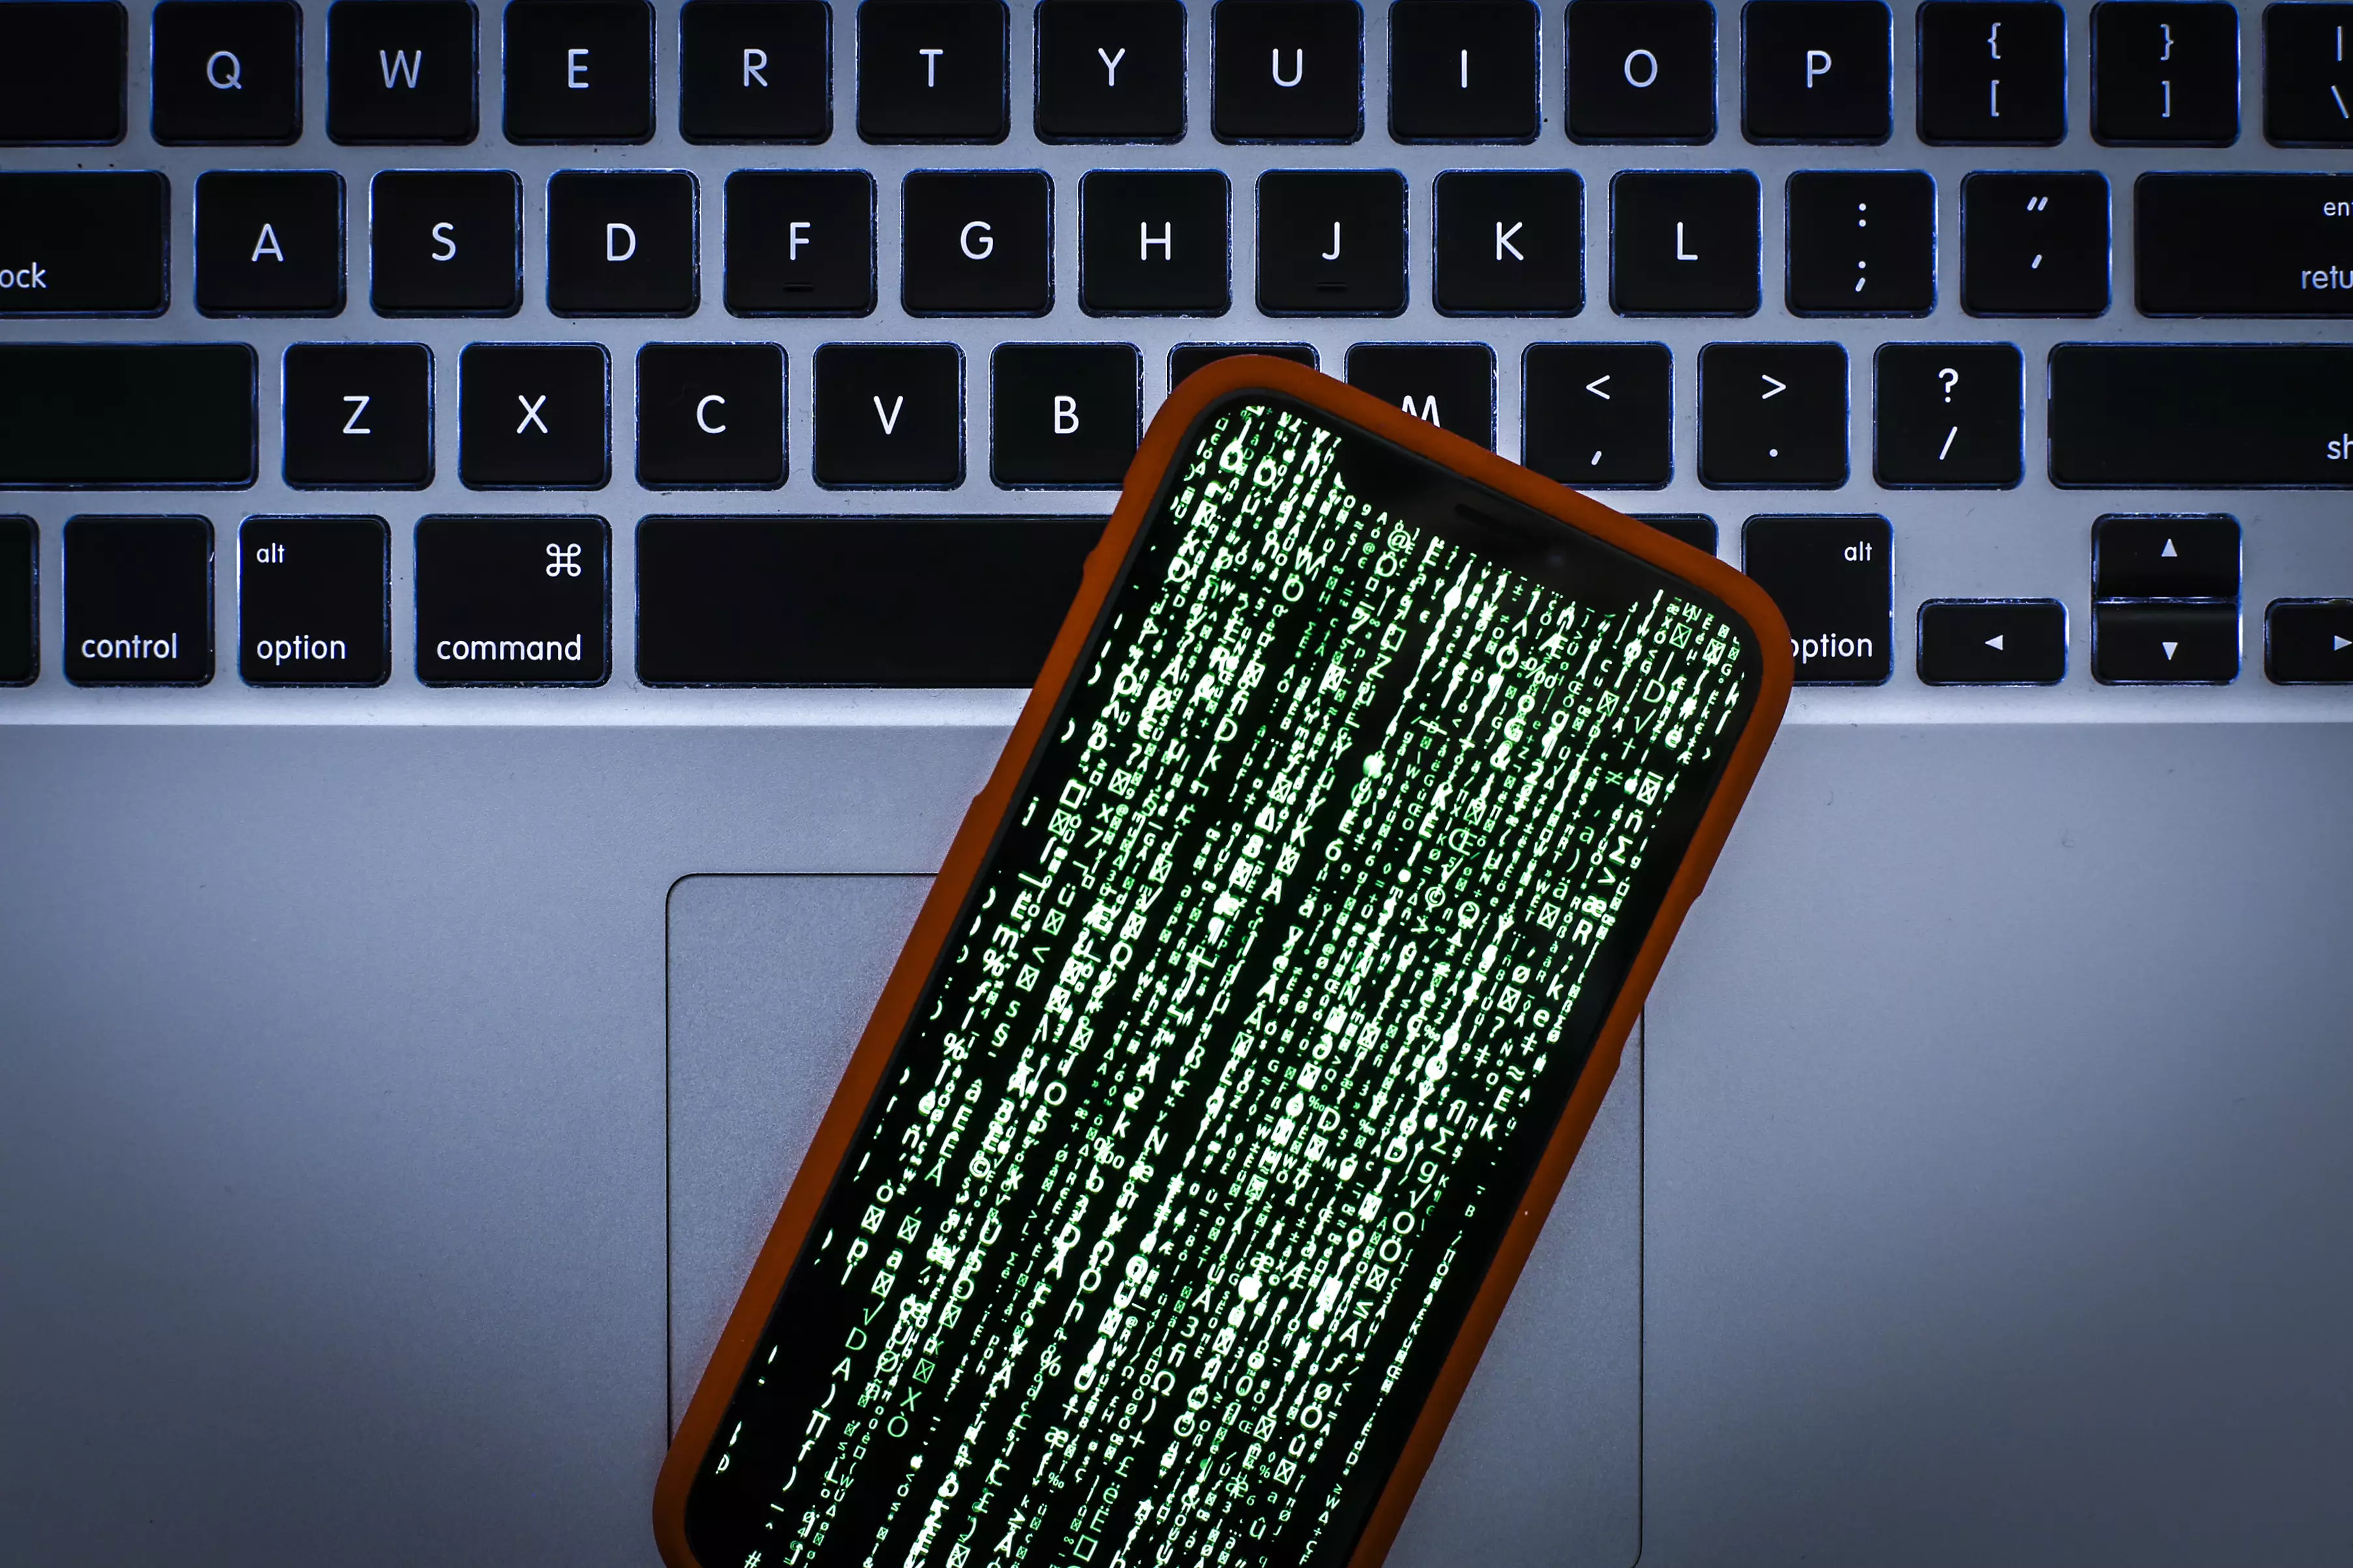 It's feared hackers may have breached Apple's security.